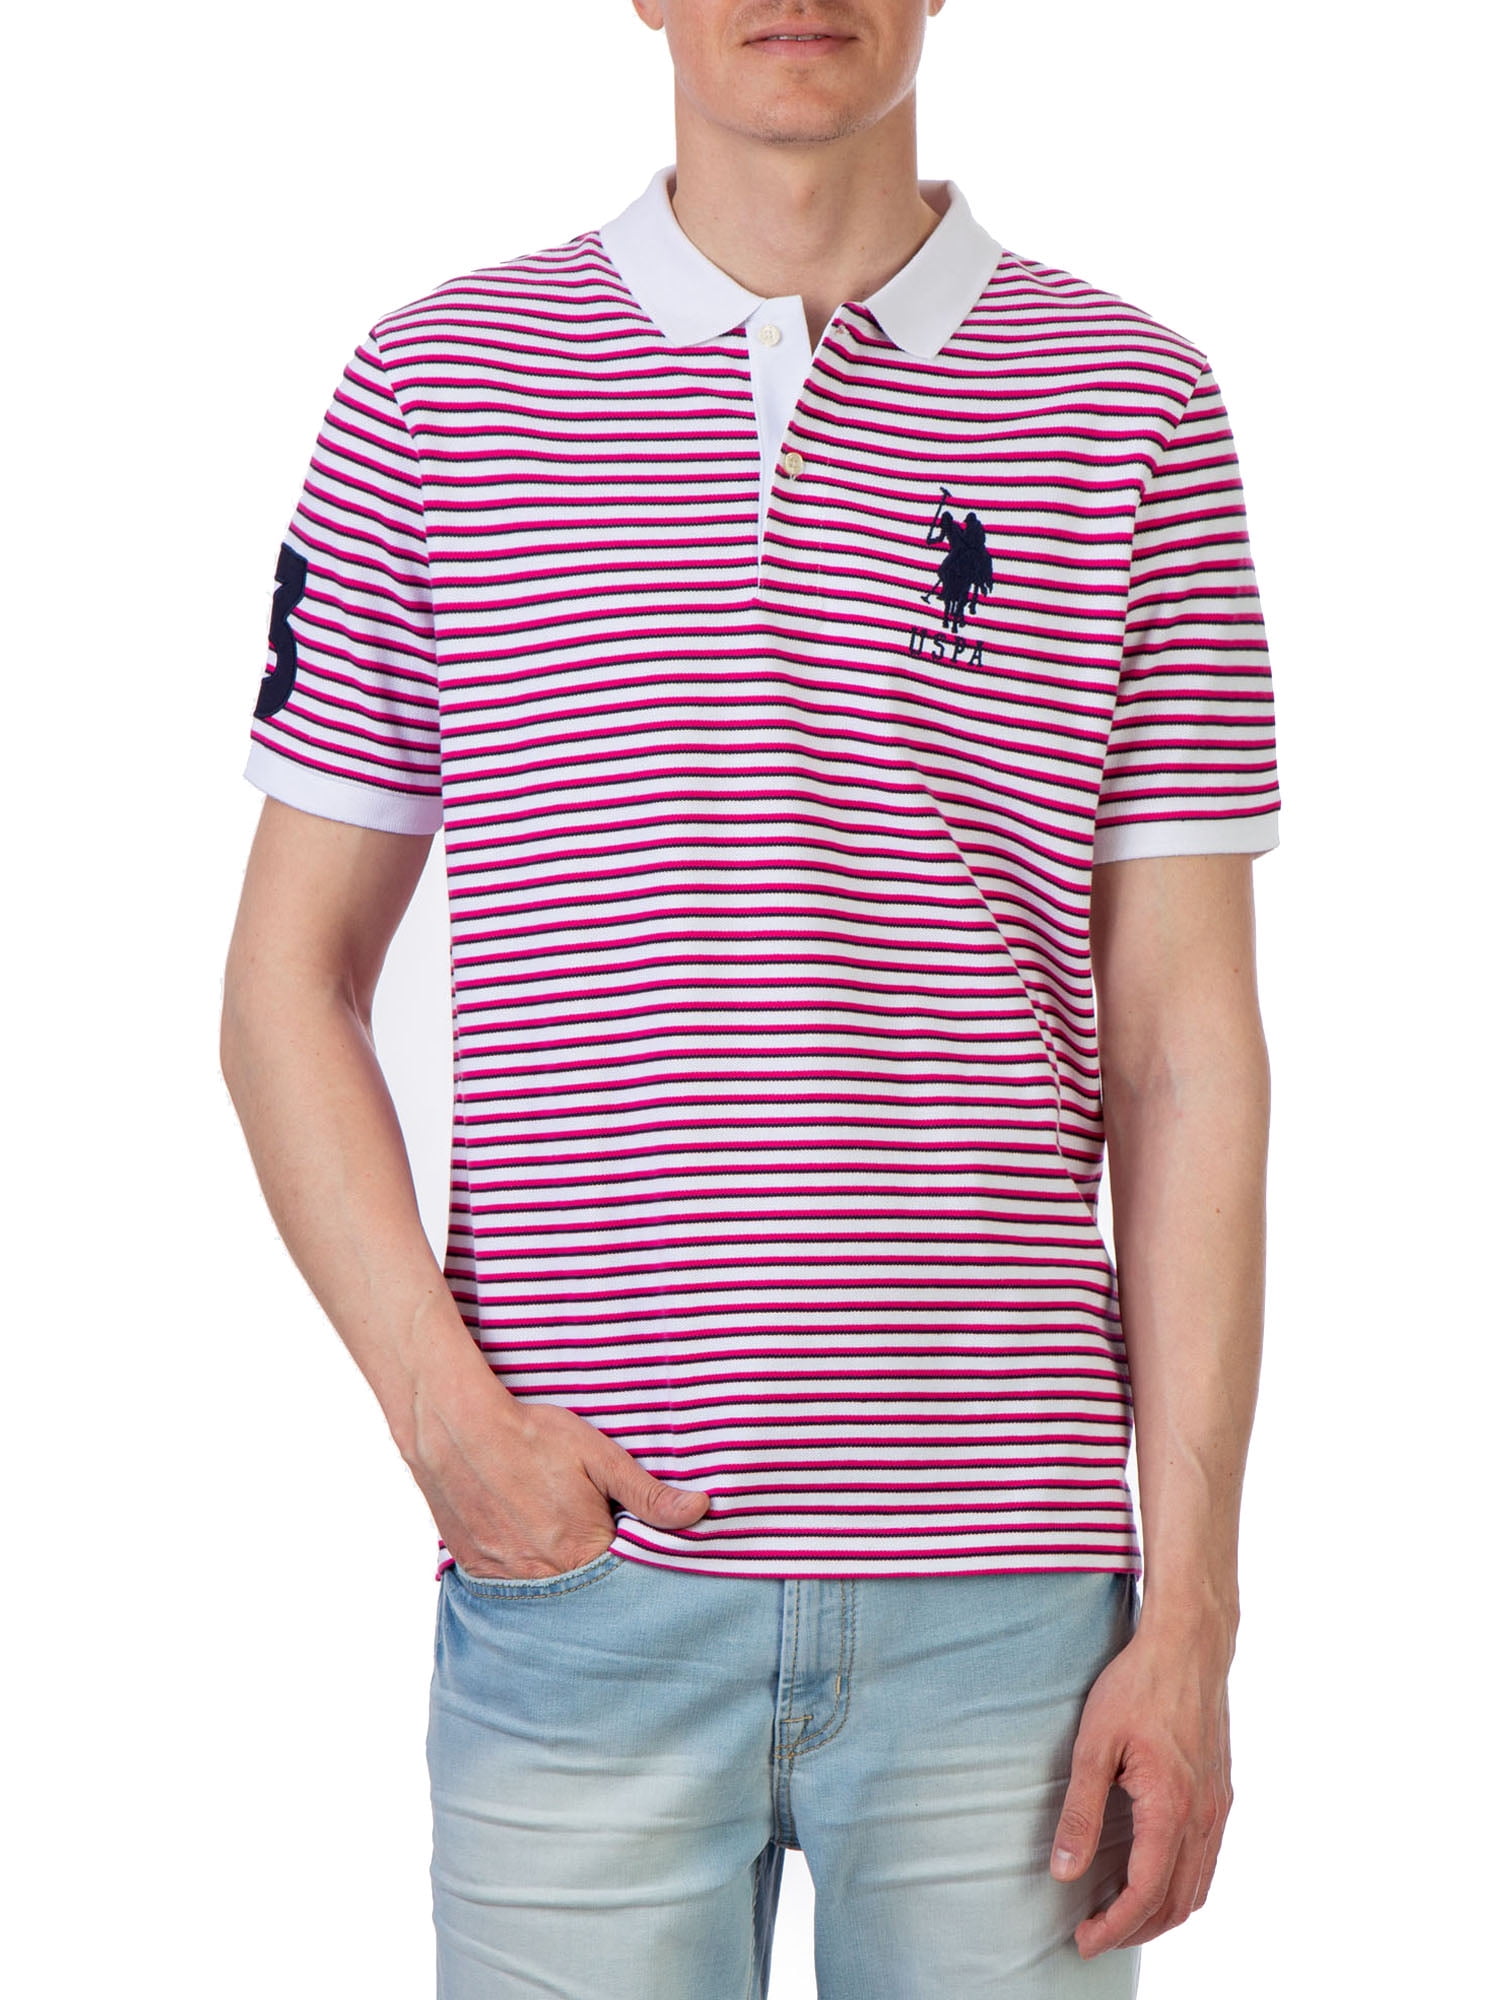 Mens Stripe Polo Shirt T-Shirt Top Short Sleeve Yarn Dyed Casual Size S-XXL New 